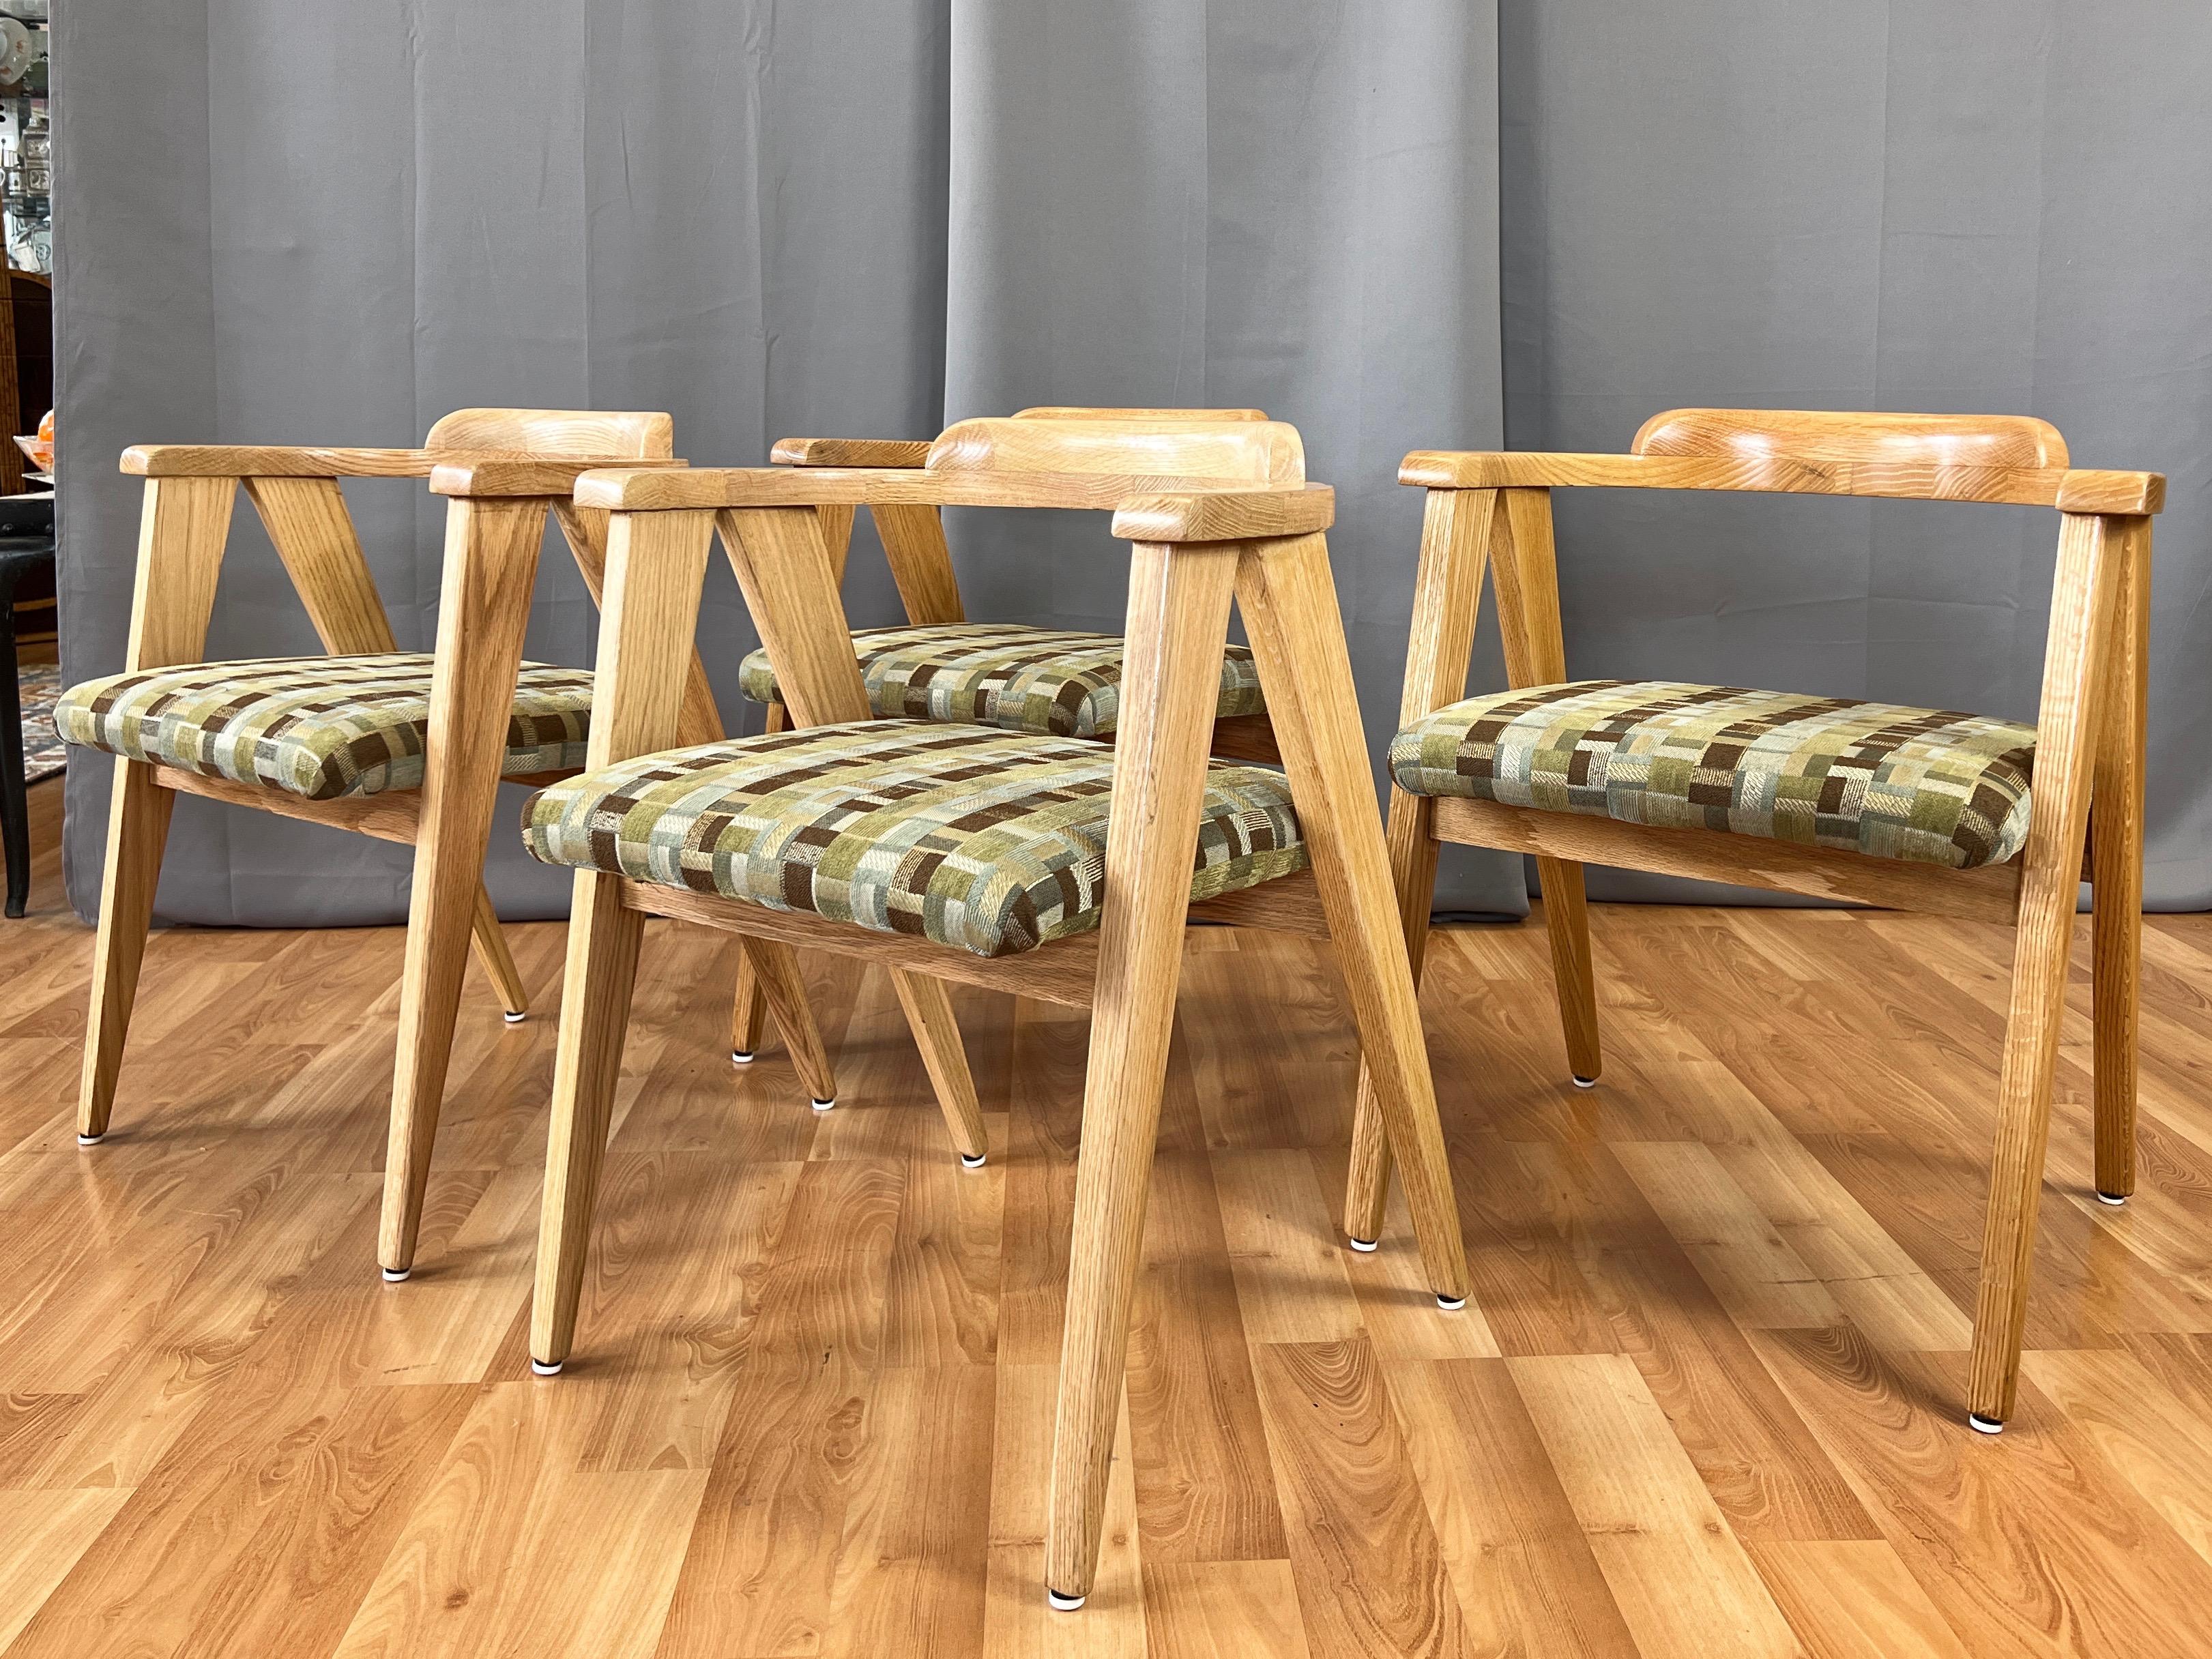 An early 1950s four-piece set of mid-century modern live oak compass leg upholstered dining chairs by Indiana Chair Company.

Frames of solid live oak with substantial compass legs and cantilevered half-circle back. A very handsome design from every